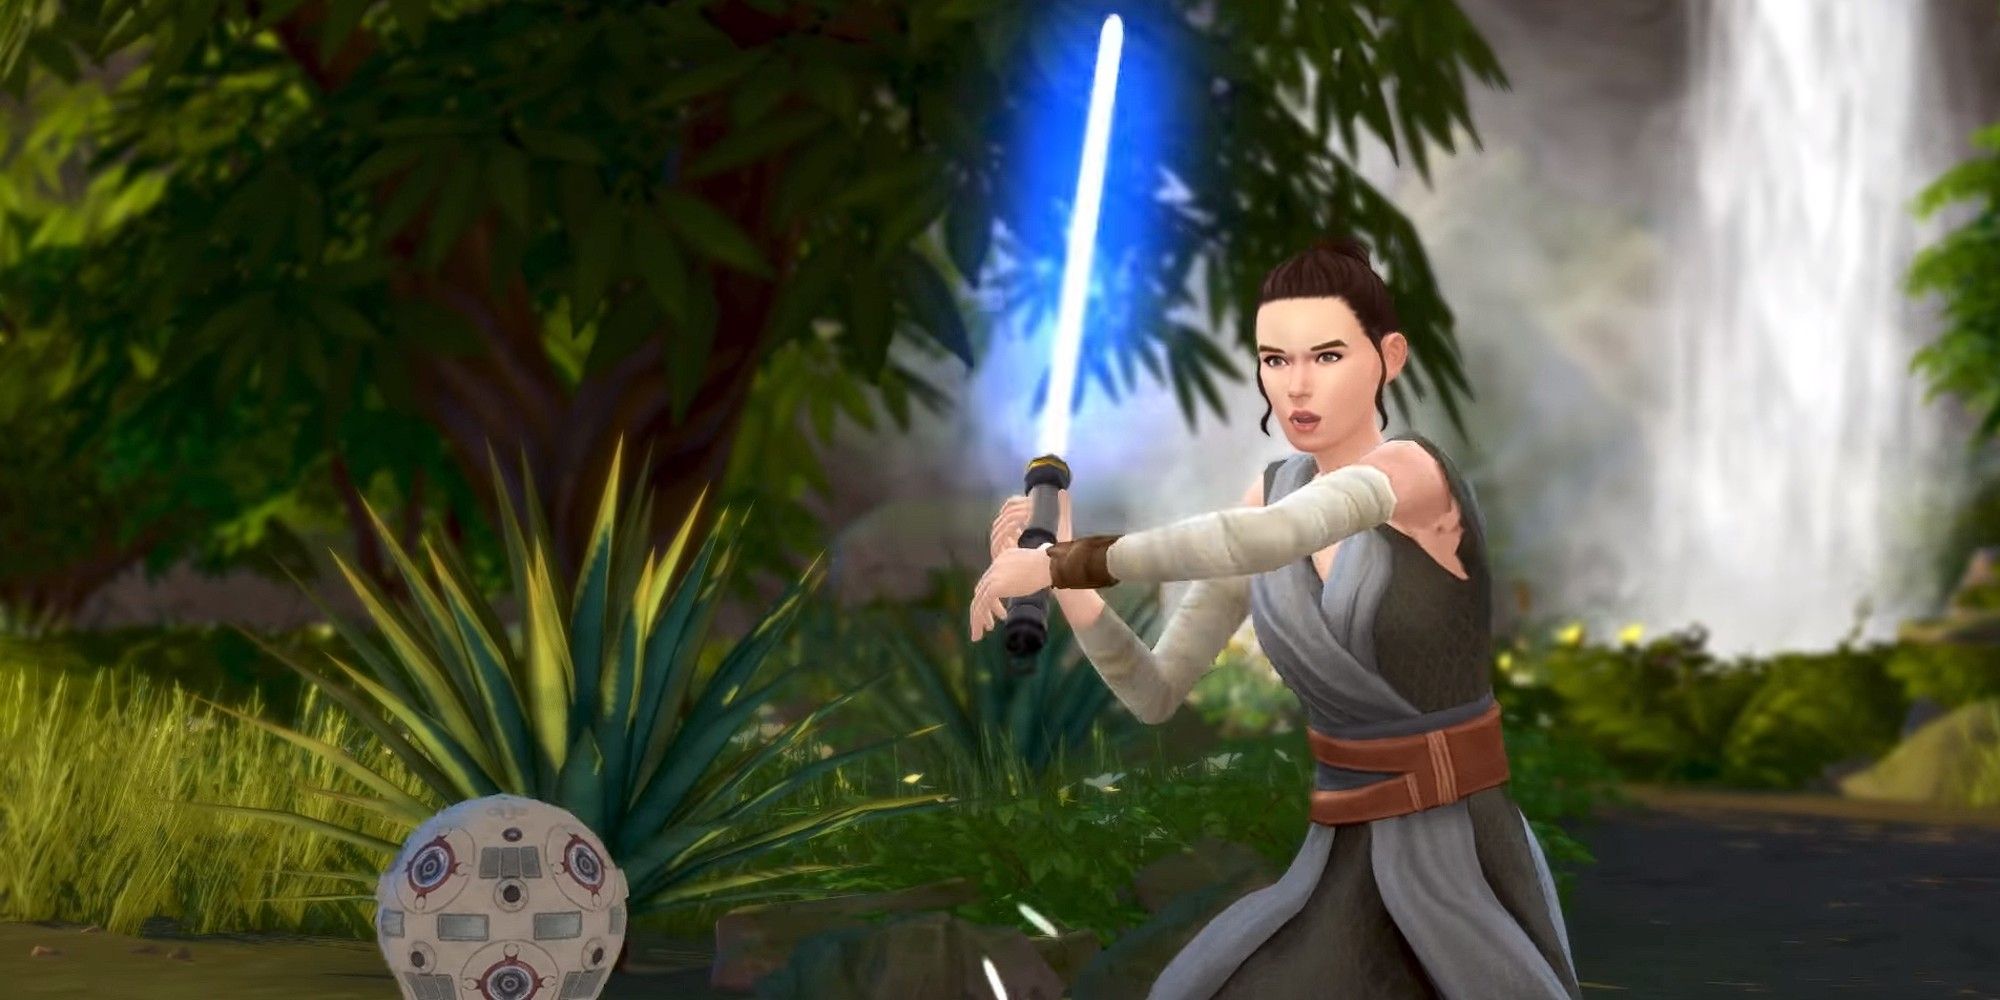 Rey practices with her lightsaber in the Resistance Encampment in The Sims 4